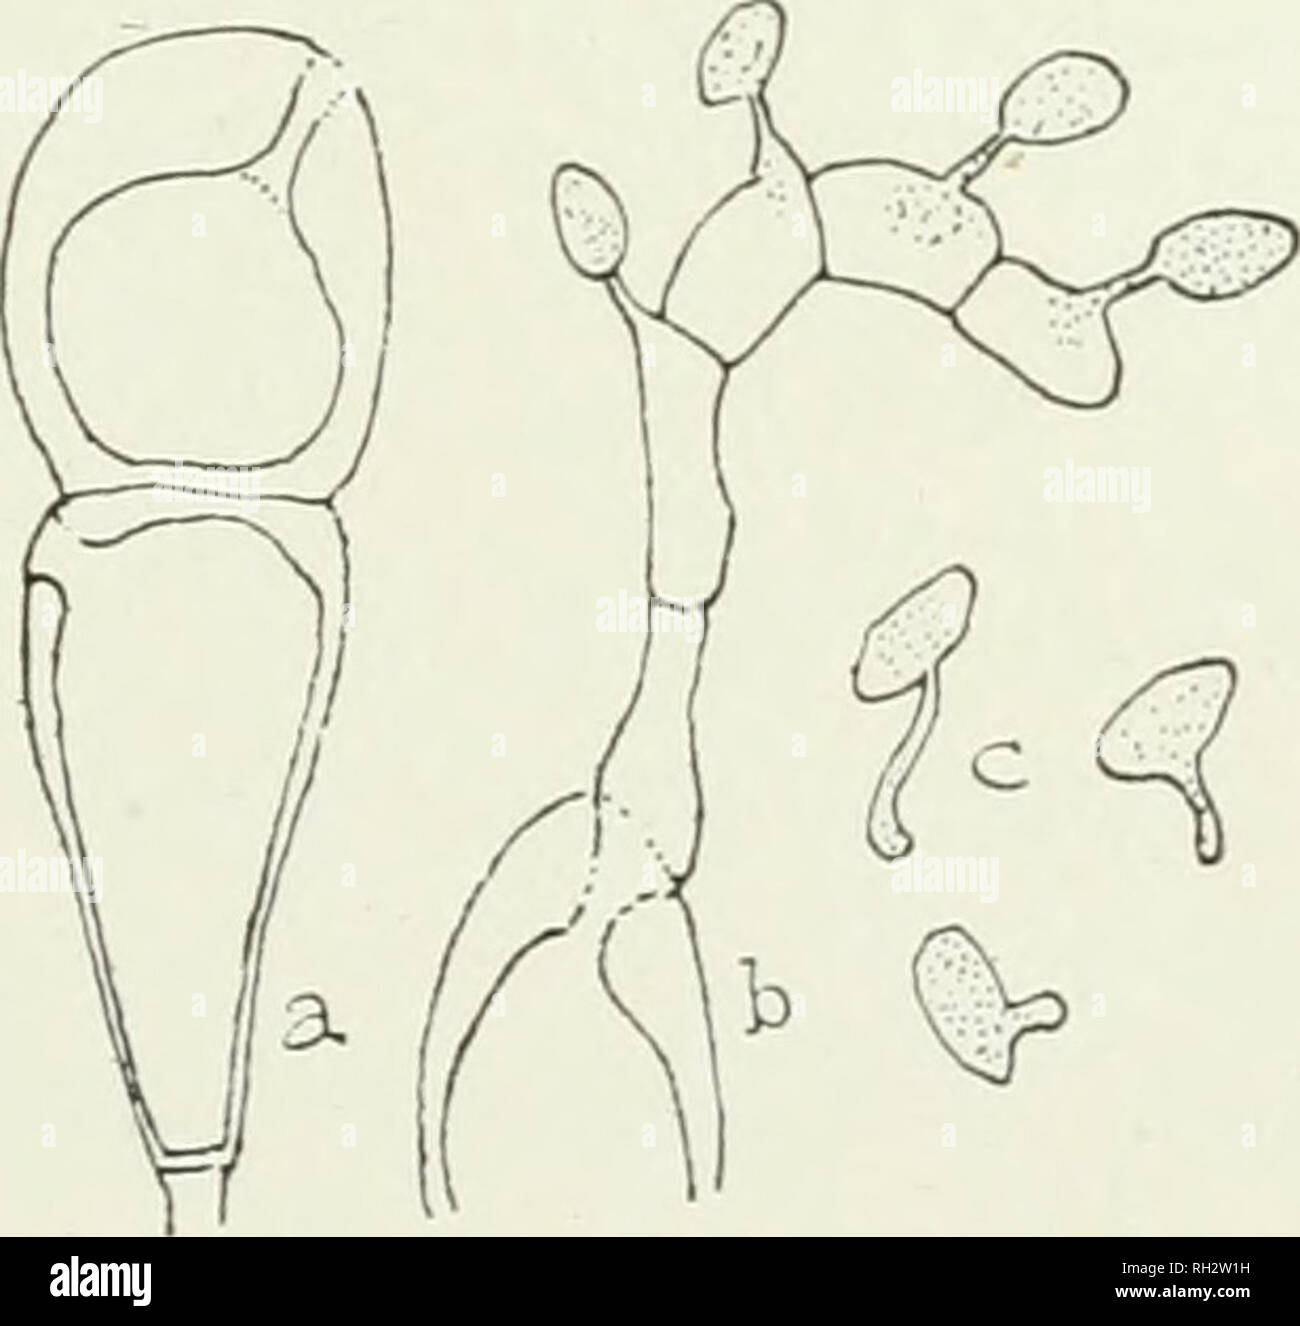 . The British rust fungi (Uredinales), their biology and classification. Uredineae. ON CYPERACEy}. PL p. 67. Cooke, Handb. p. 493 ; Micr. Fung. p. 203 p.p. Spermogones. Epiphyllous, in small clusters, honey-coloured. JEcidiospores. Mcidm hypophyllous or occasionally amphi- genous, often on the petioles and stems, on reddish, yellow or pur- plish spots, in dense clusters of various sizes which are often very large and cause great swelling and distortion on the stems, cup- shaped, with torn white recurved margin; spores verruculose, orange, 16—26x12—20 yti. Uredospores. Sori amphige-. nous, gene Stock Photo